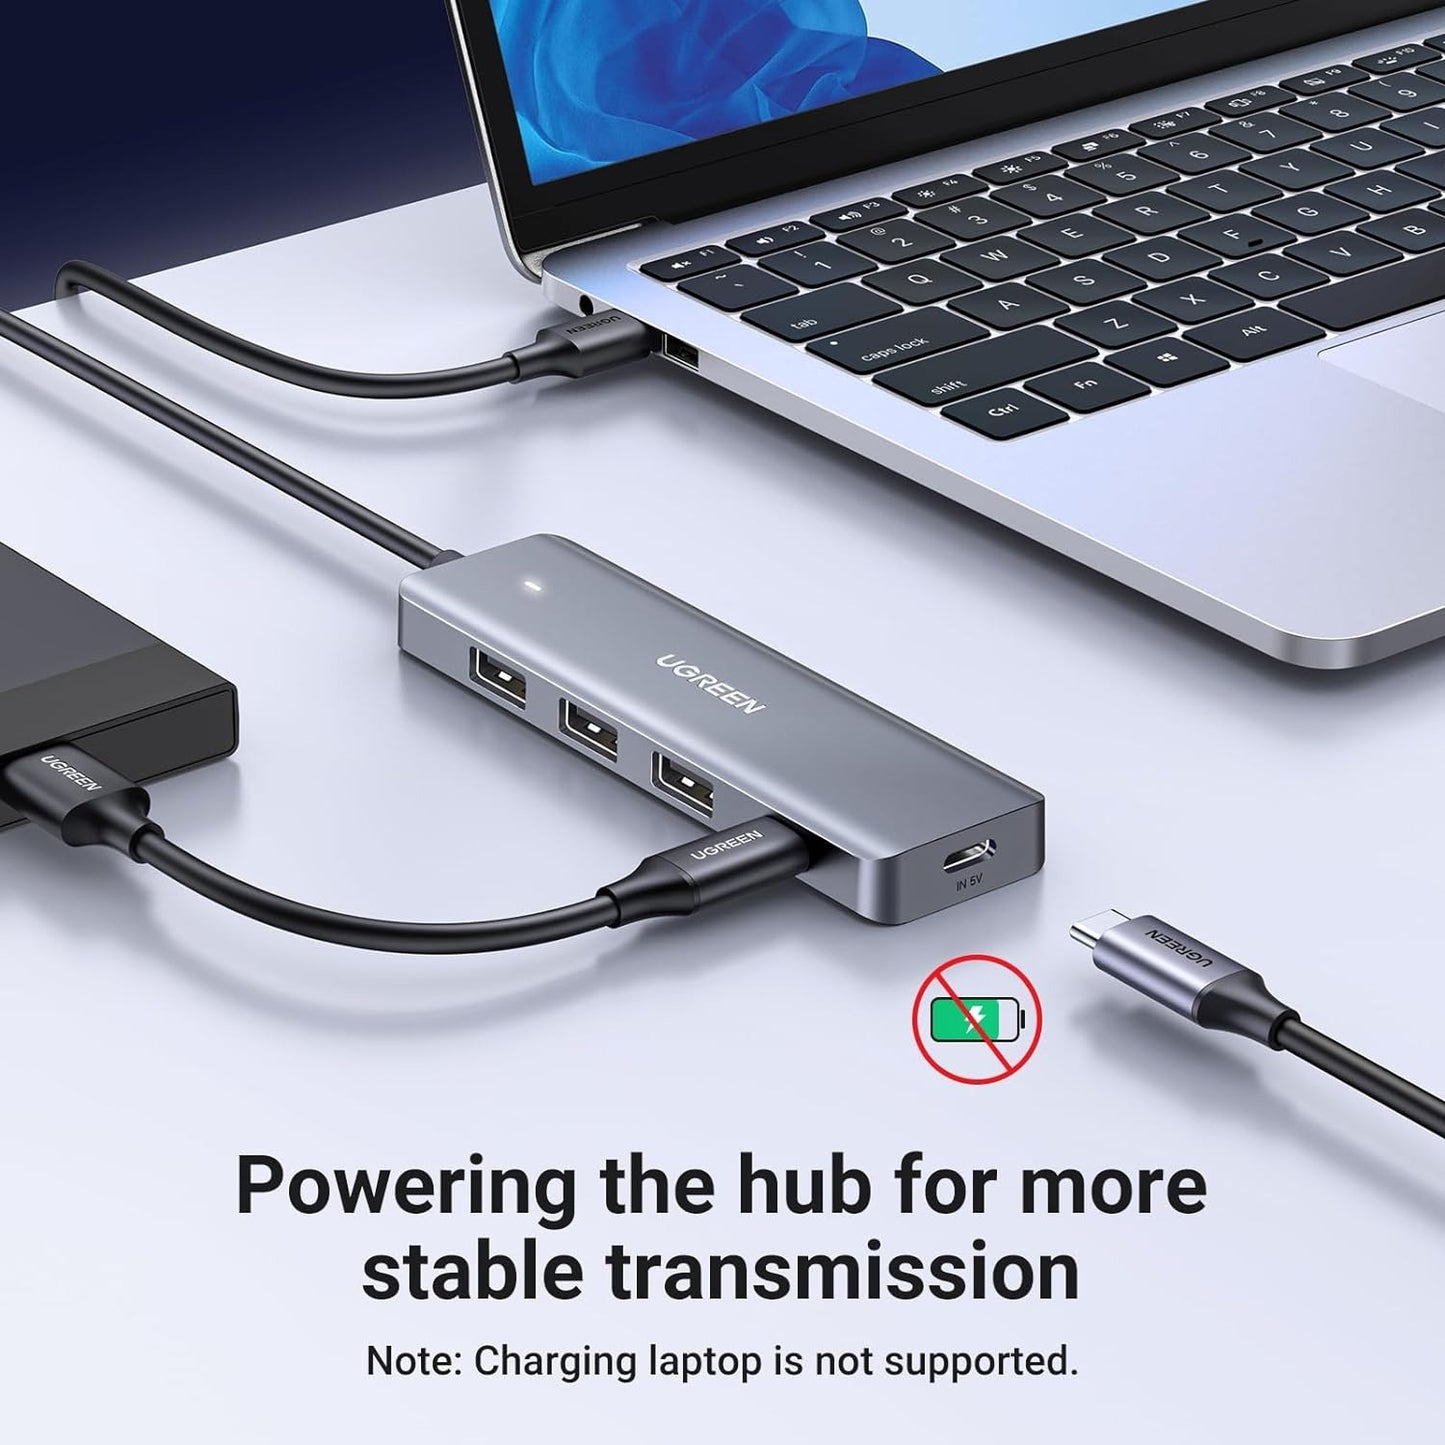 UGREEN 4-Port USB 3.0 Hub with USB A and USB C Data Ports, 5Gbps Transmission Speed and 0.6 Meter Extended Cable for Laptop, Computer, PC, Windows, macOS, Flash Drives, HDD, SDD | 15920